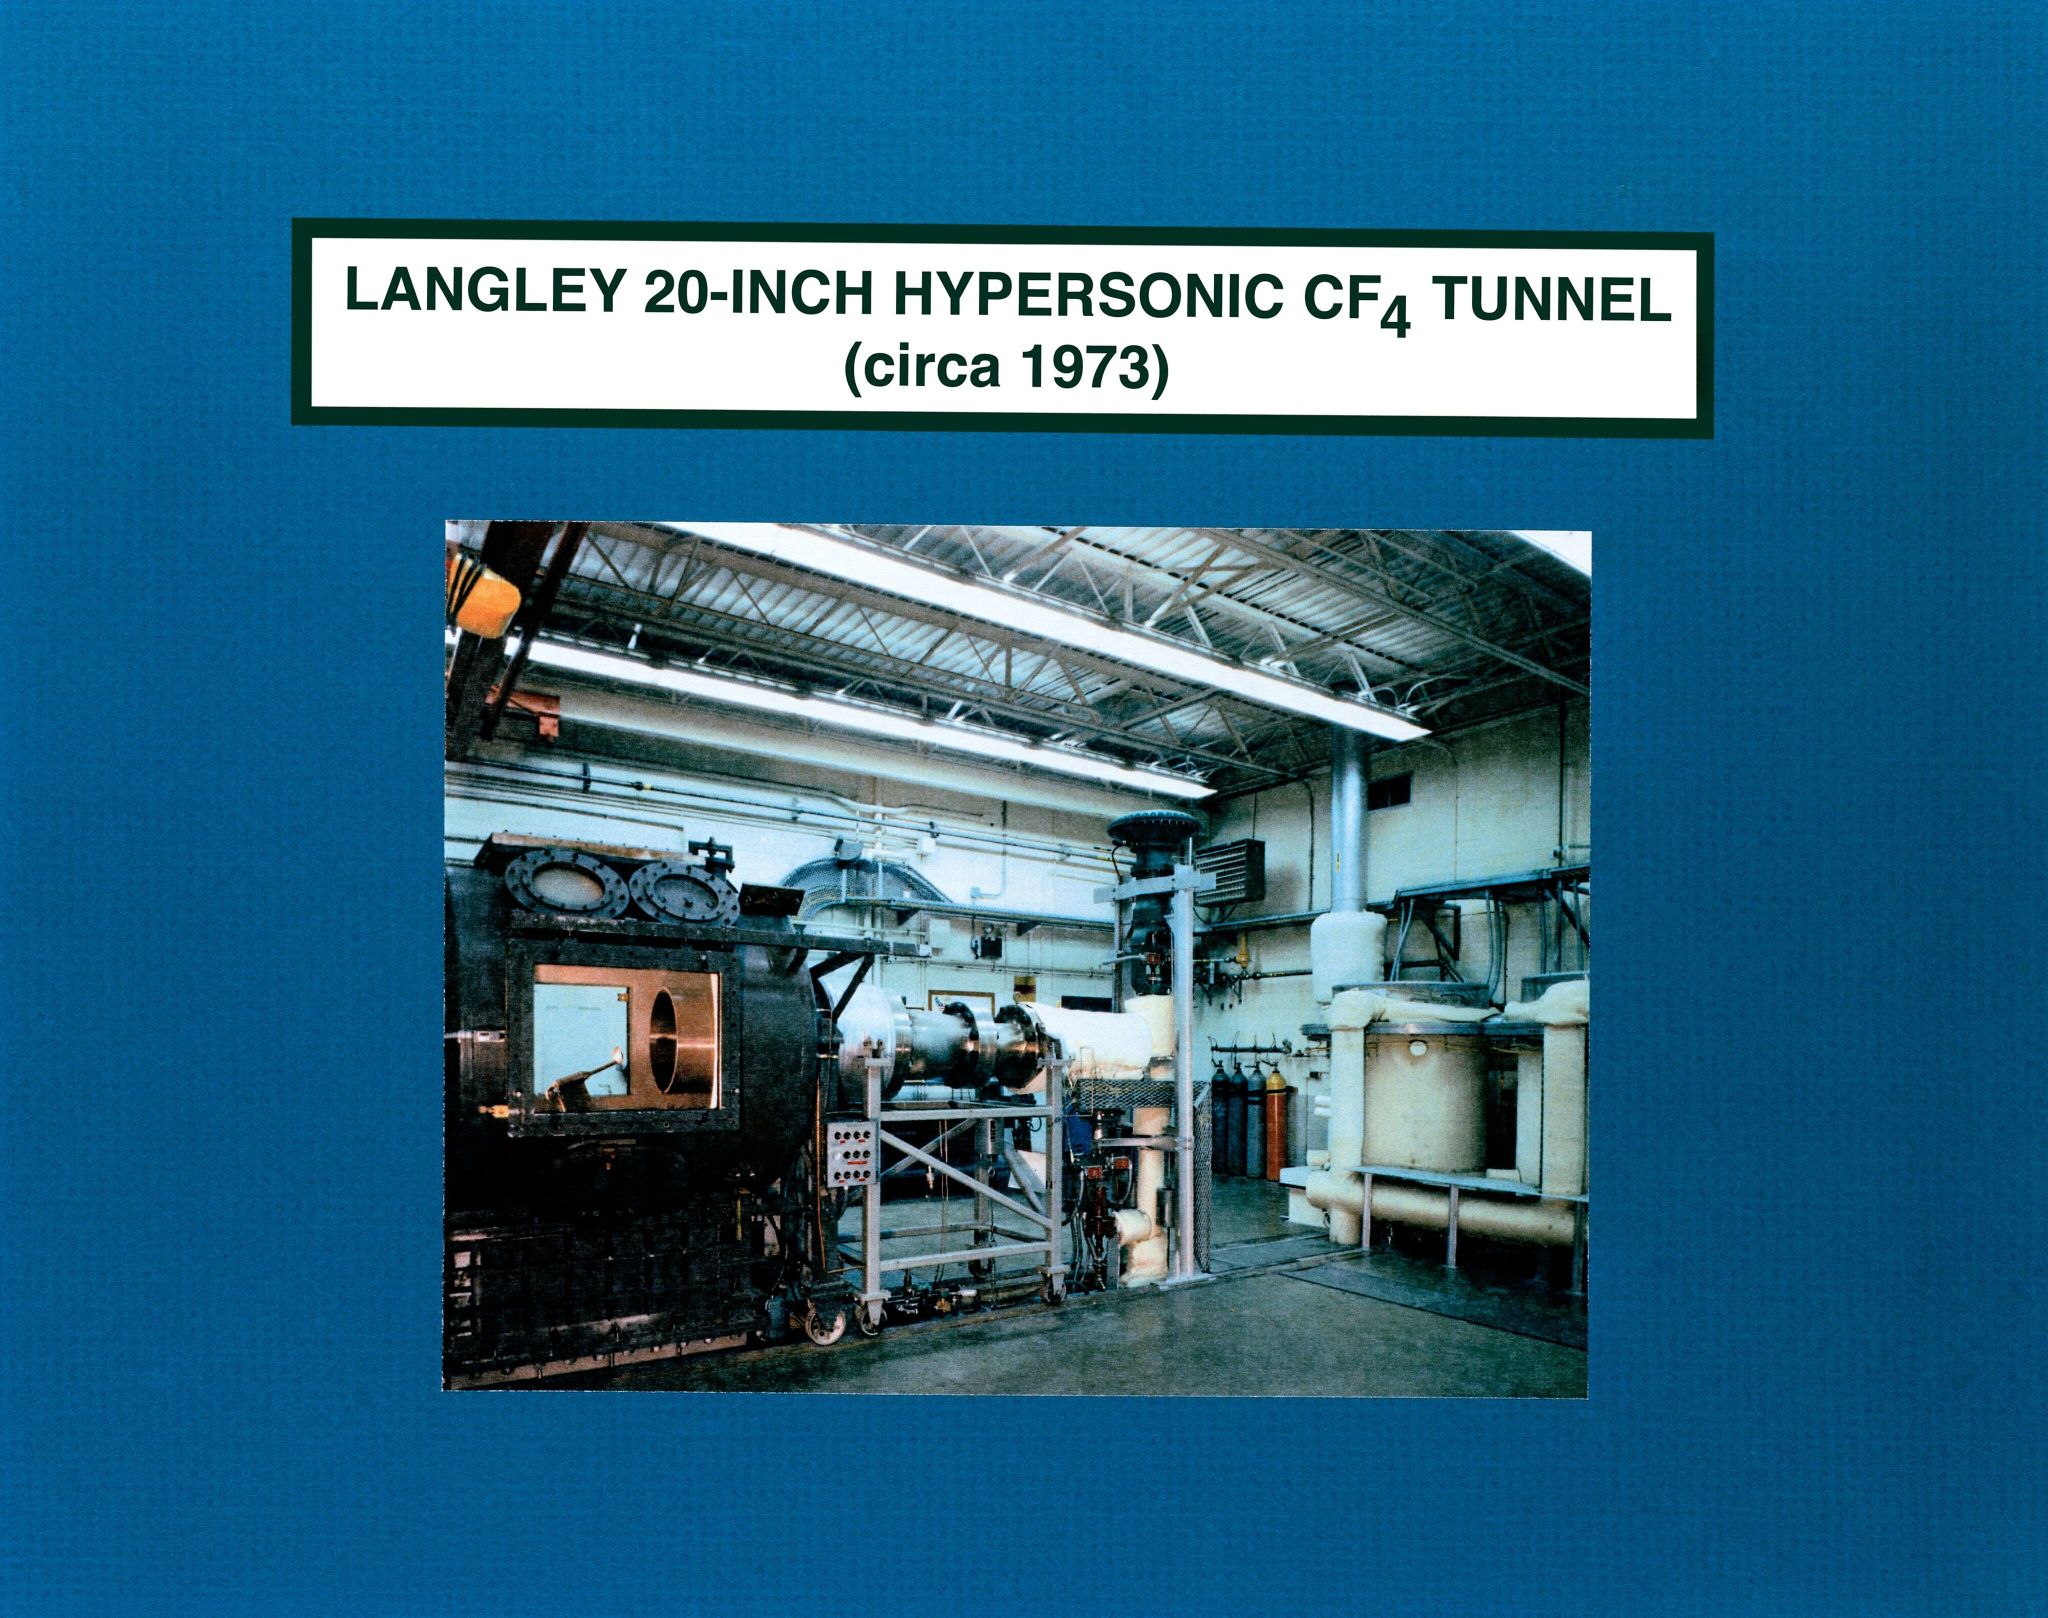 An image of the Langley 20-inch hypersonic CF4 tunnel (circa 1973). 